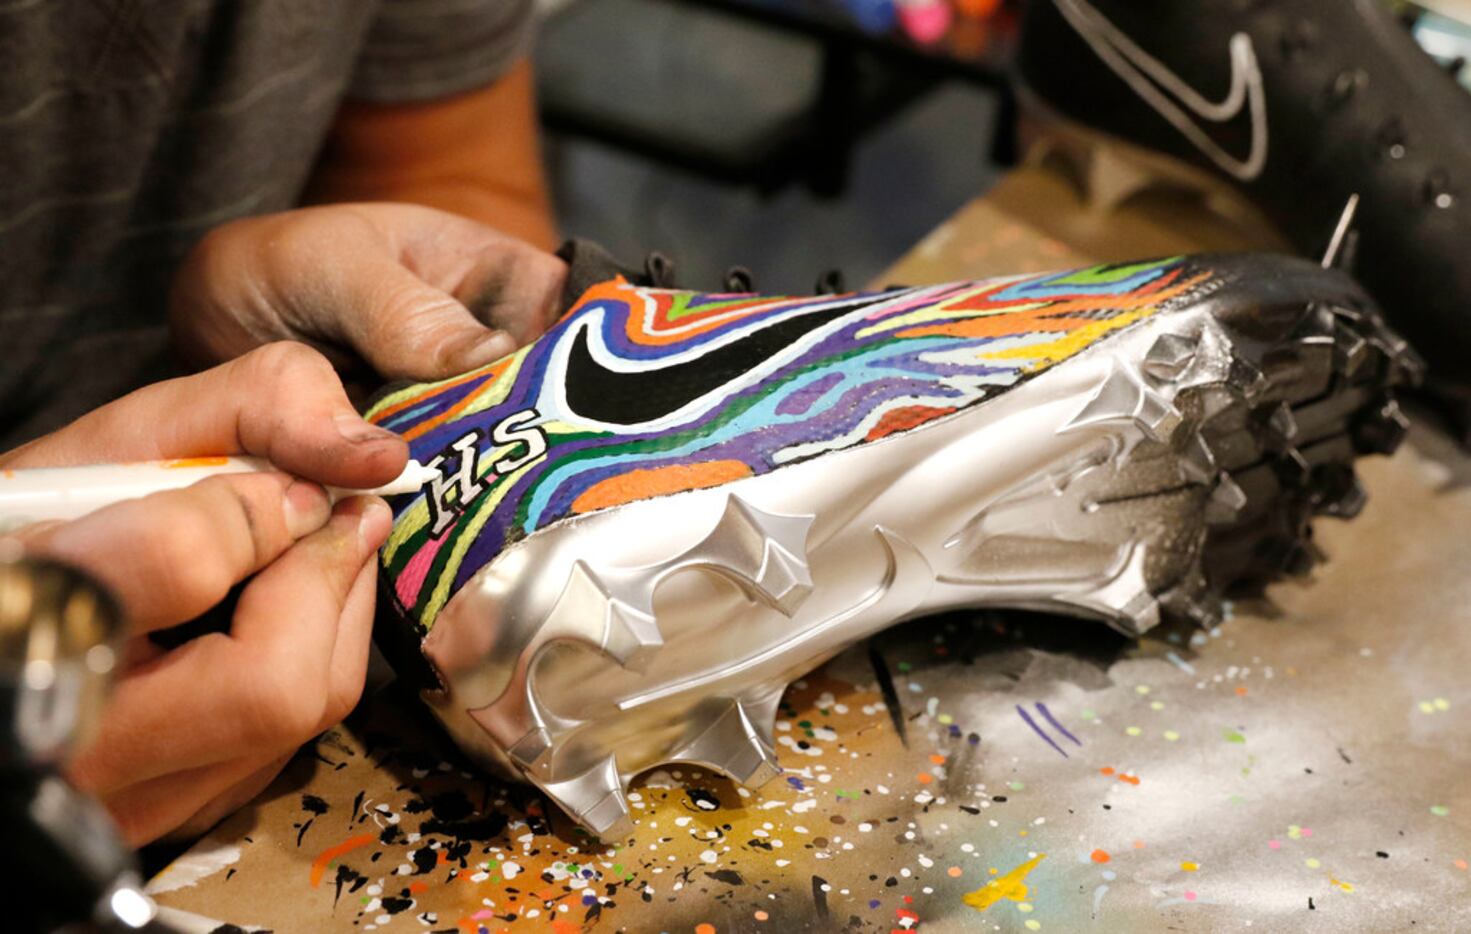 Luke Savage, 16, applies white paint on the HS logo on cleats he created for SportsDayHS in...